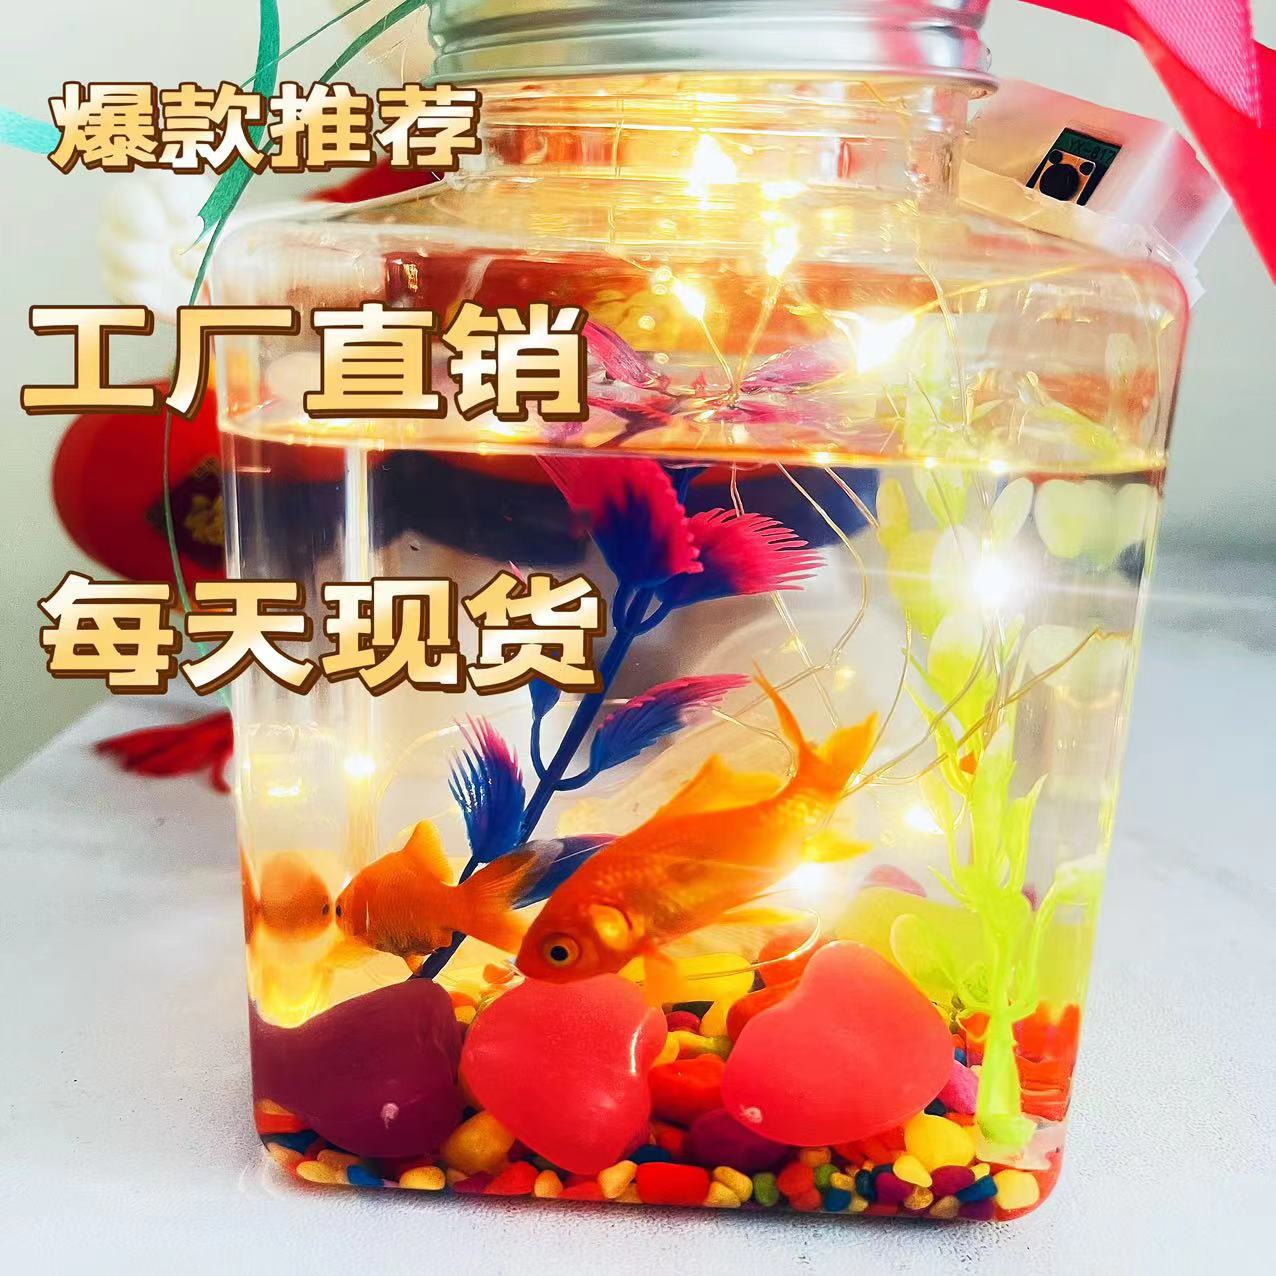 2023 New Project Stall Artifact Internet Celebrity Can Fish Park Square Night Market Hot Sale Hot Sale Light-Emitting Small Goldfish